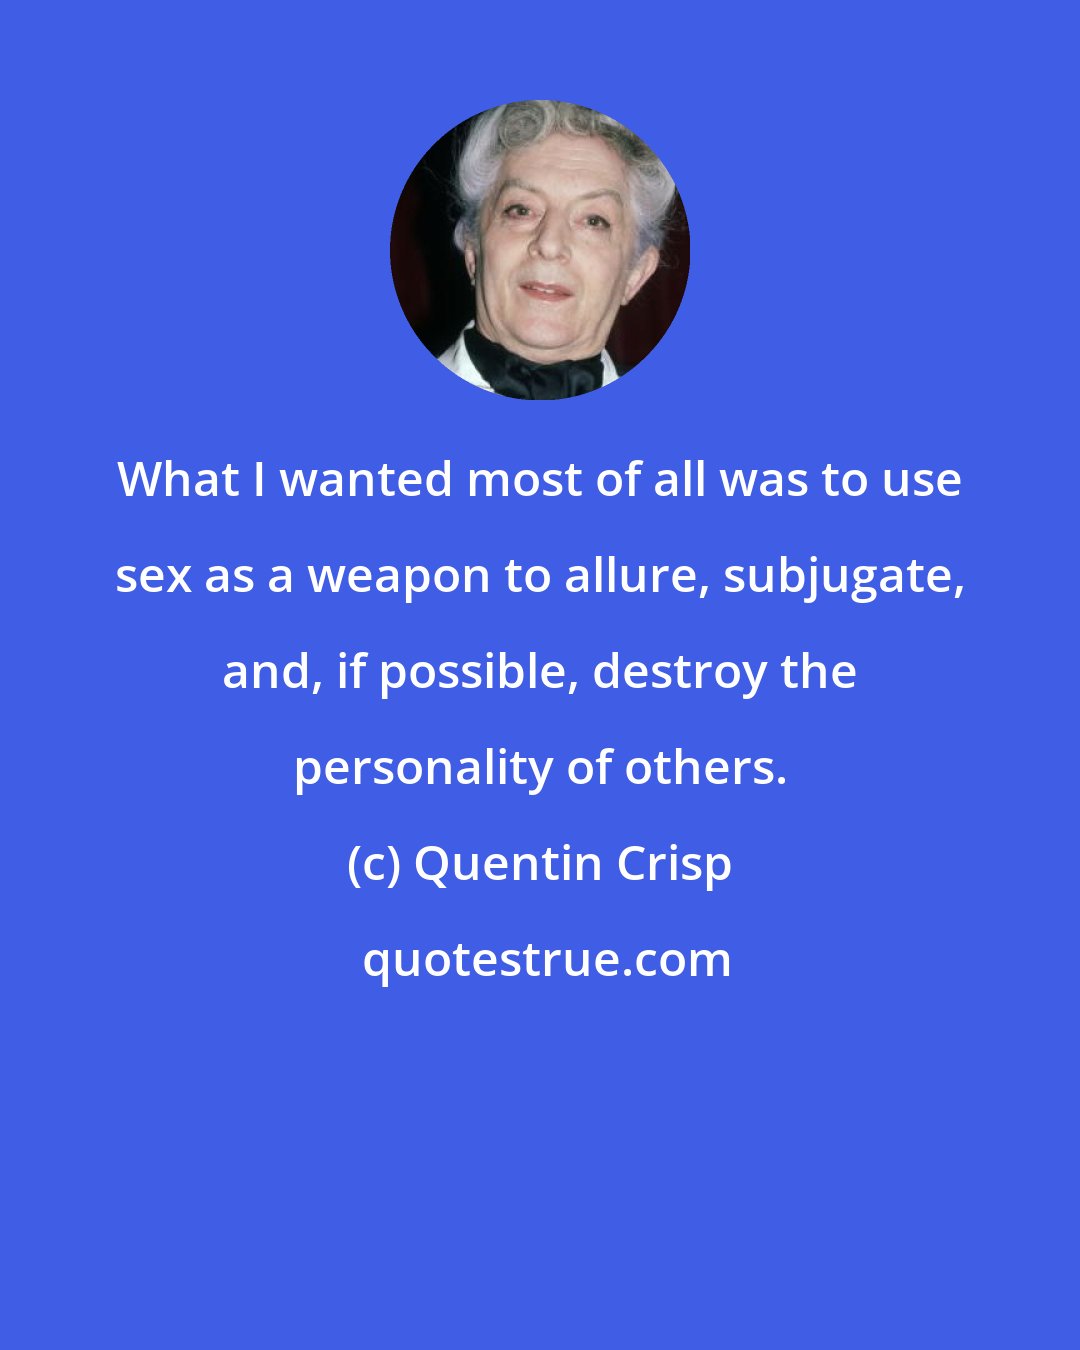 Quentin Crisp: What I wanted most of all was to use sex as a weapon to allure, subjugate, and, if possible, destroy the personality of others.